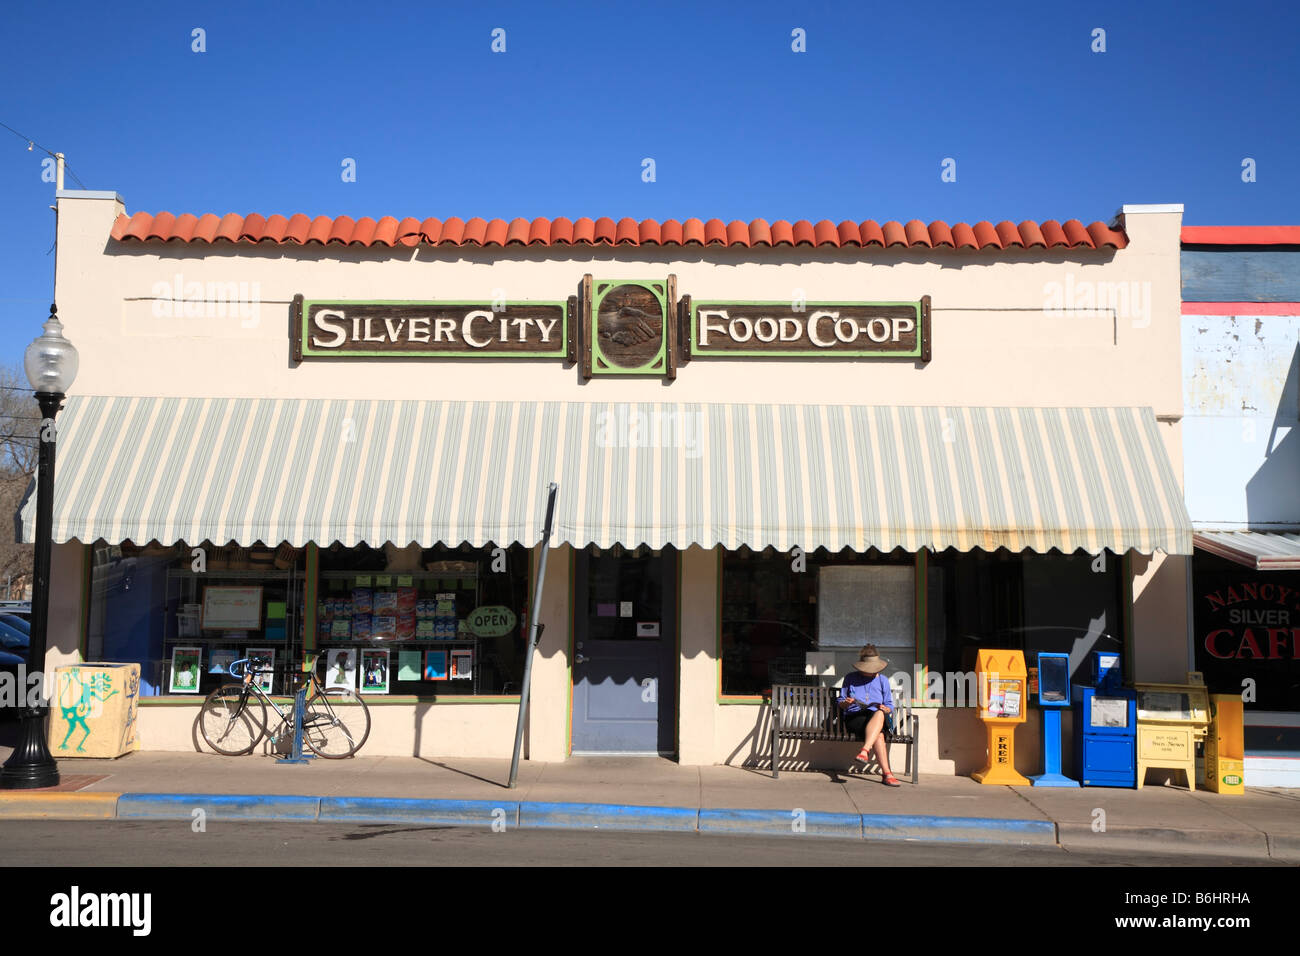 Person sitting on a bench outside a quaint co-op natural food store downtown Bullard St Silver City, New Mexico, United States Stock Photo